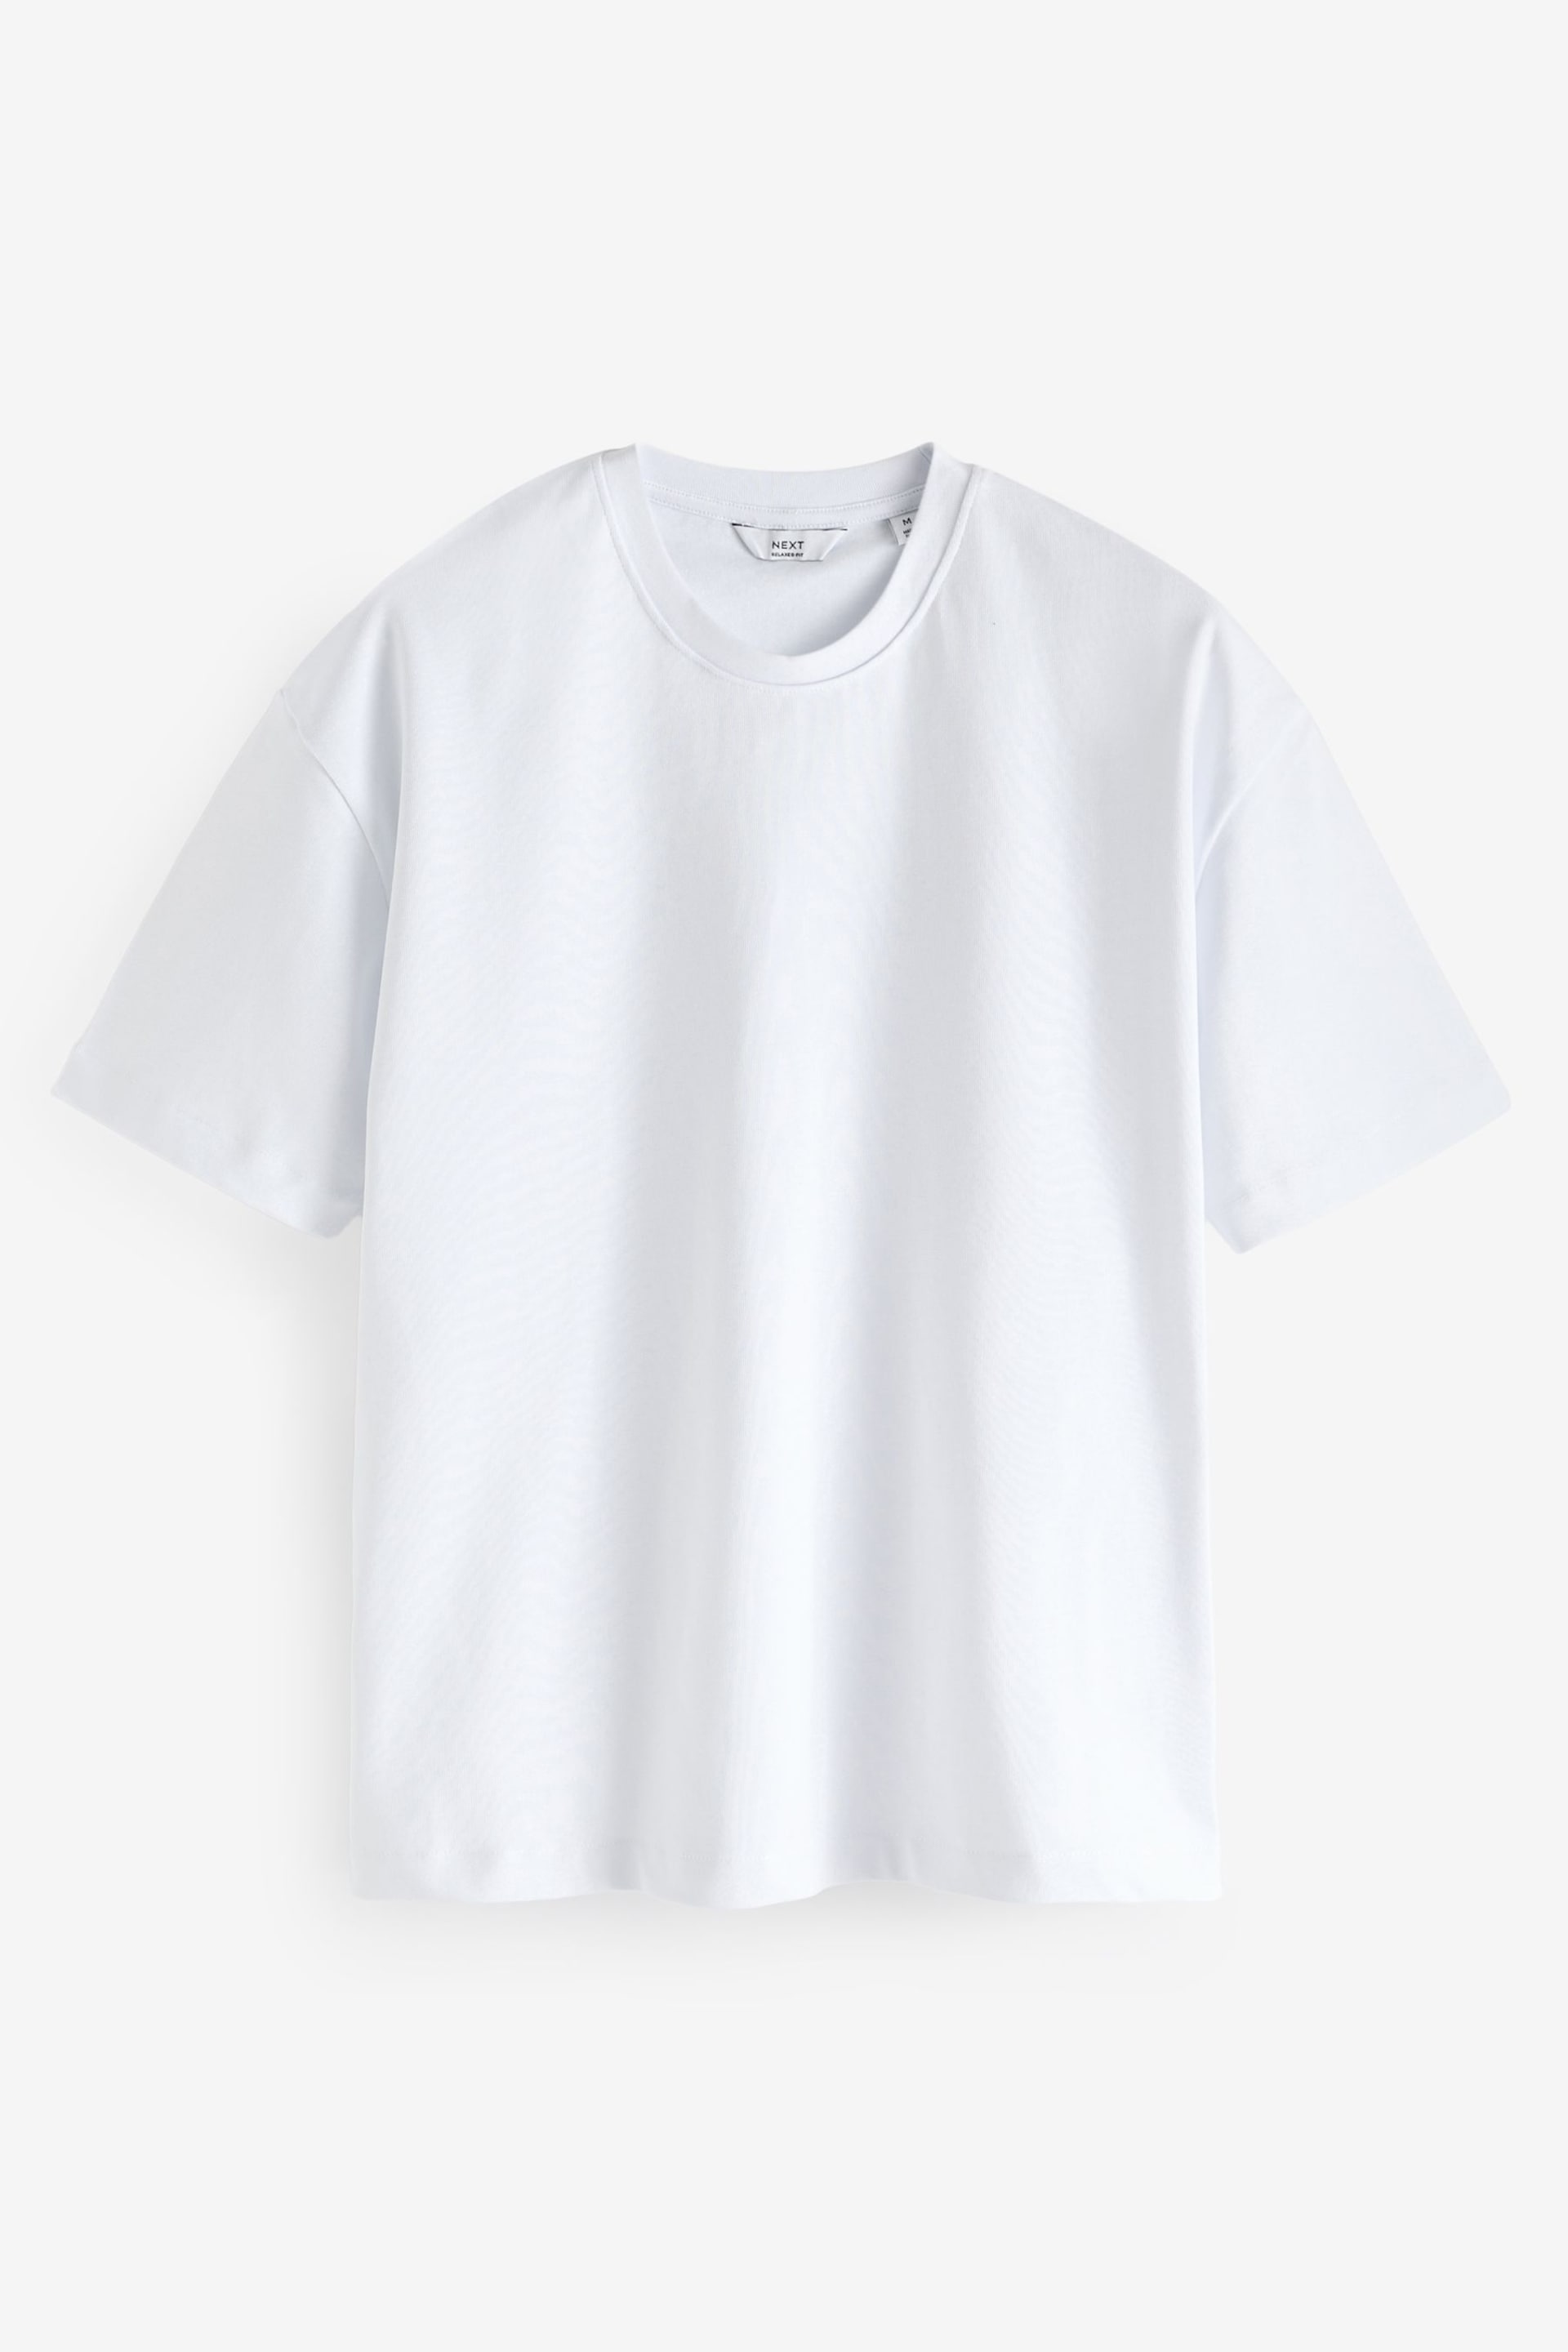 White Relaxed Fit Heavy weight T-Shirts 3 Pack - Image 6 of 8